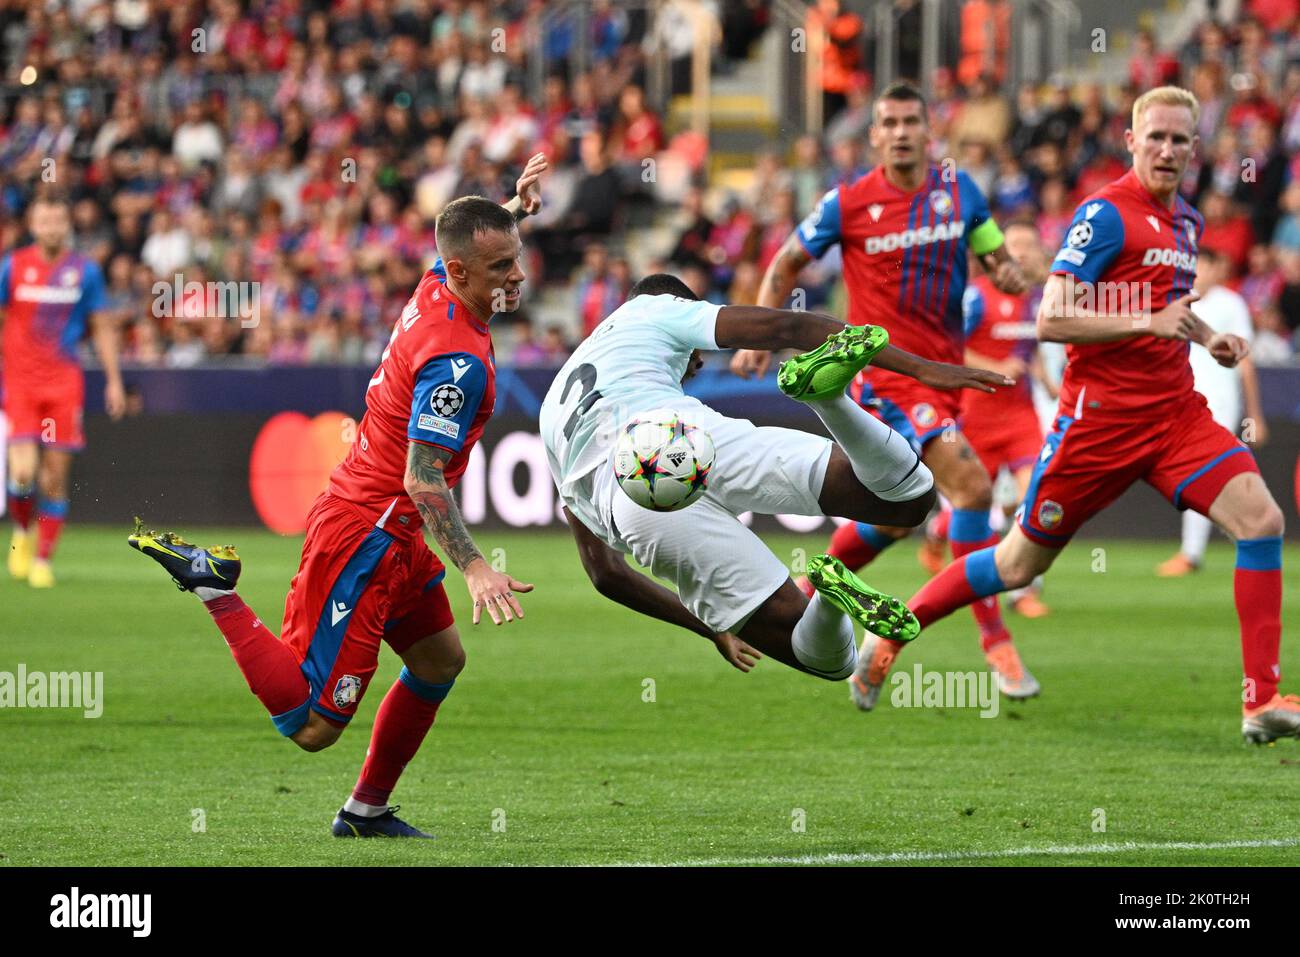 From left soccer players Jan Sykora of Viktoria Plzen and Denzel Dumfries of Inter Milan  in action during the Viktoria Plzen vs Inter Milan, 2nd round of group C of football Champions' League match in Pilsen, Czech Republic, September 13, 2022. (CTK Photo/Michal Kamaryt) Stock Photo